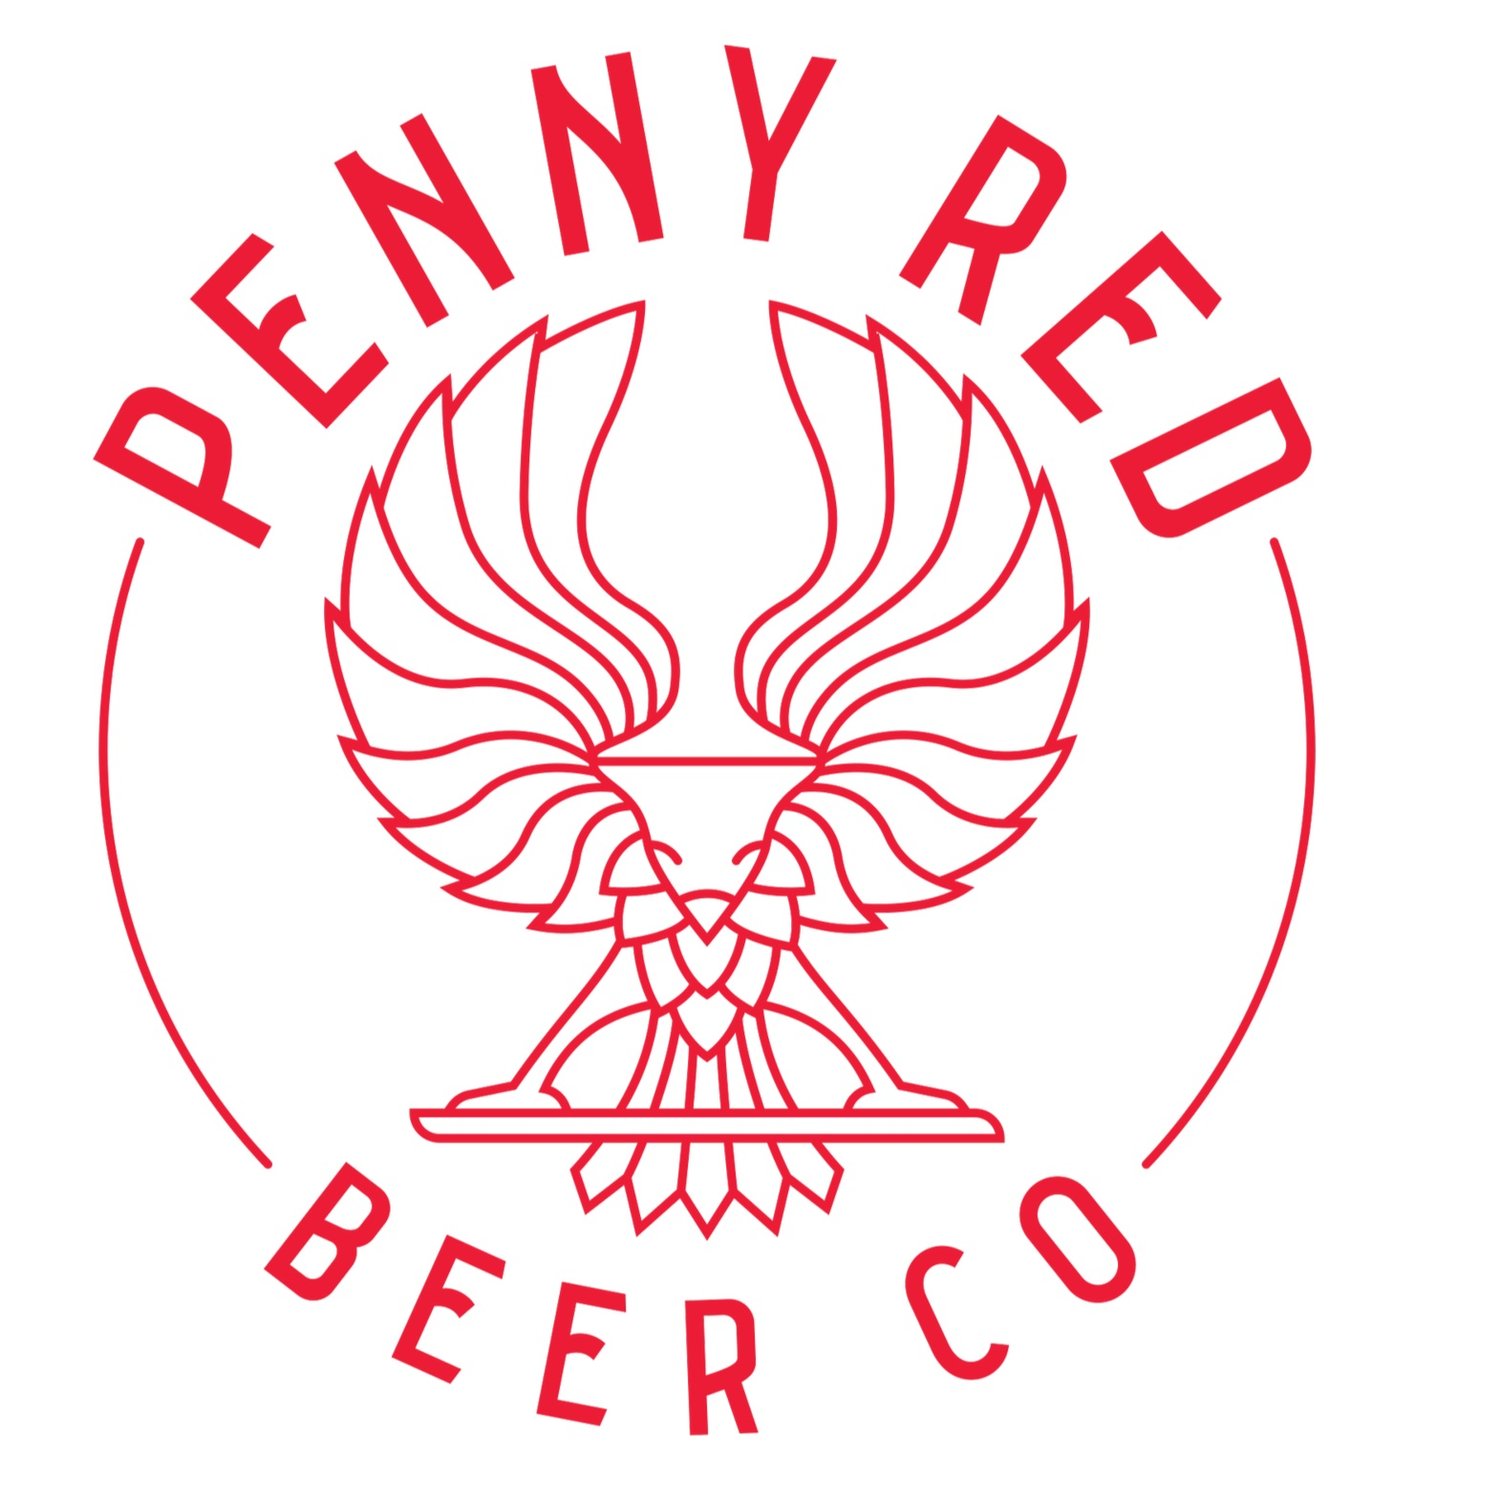 Penny Red Beer Co